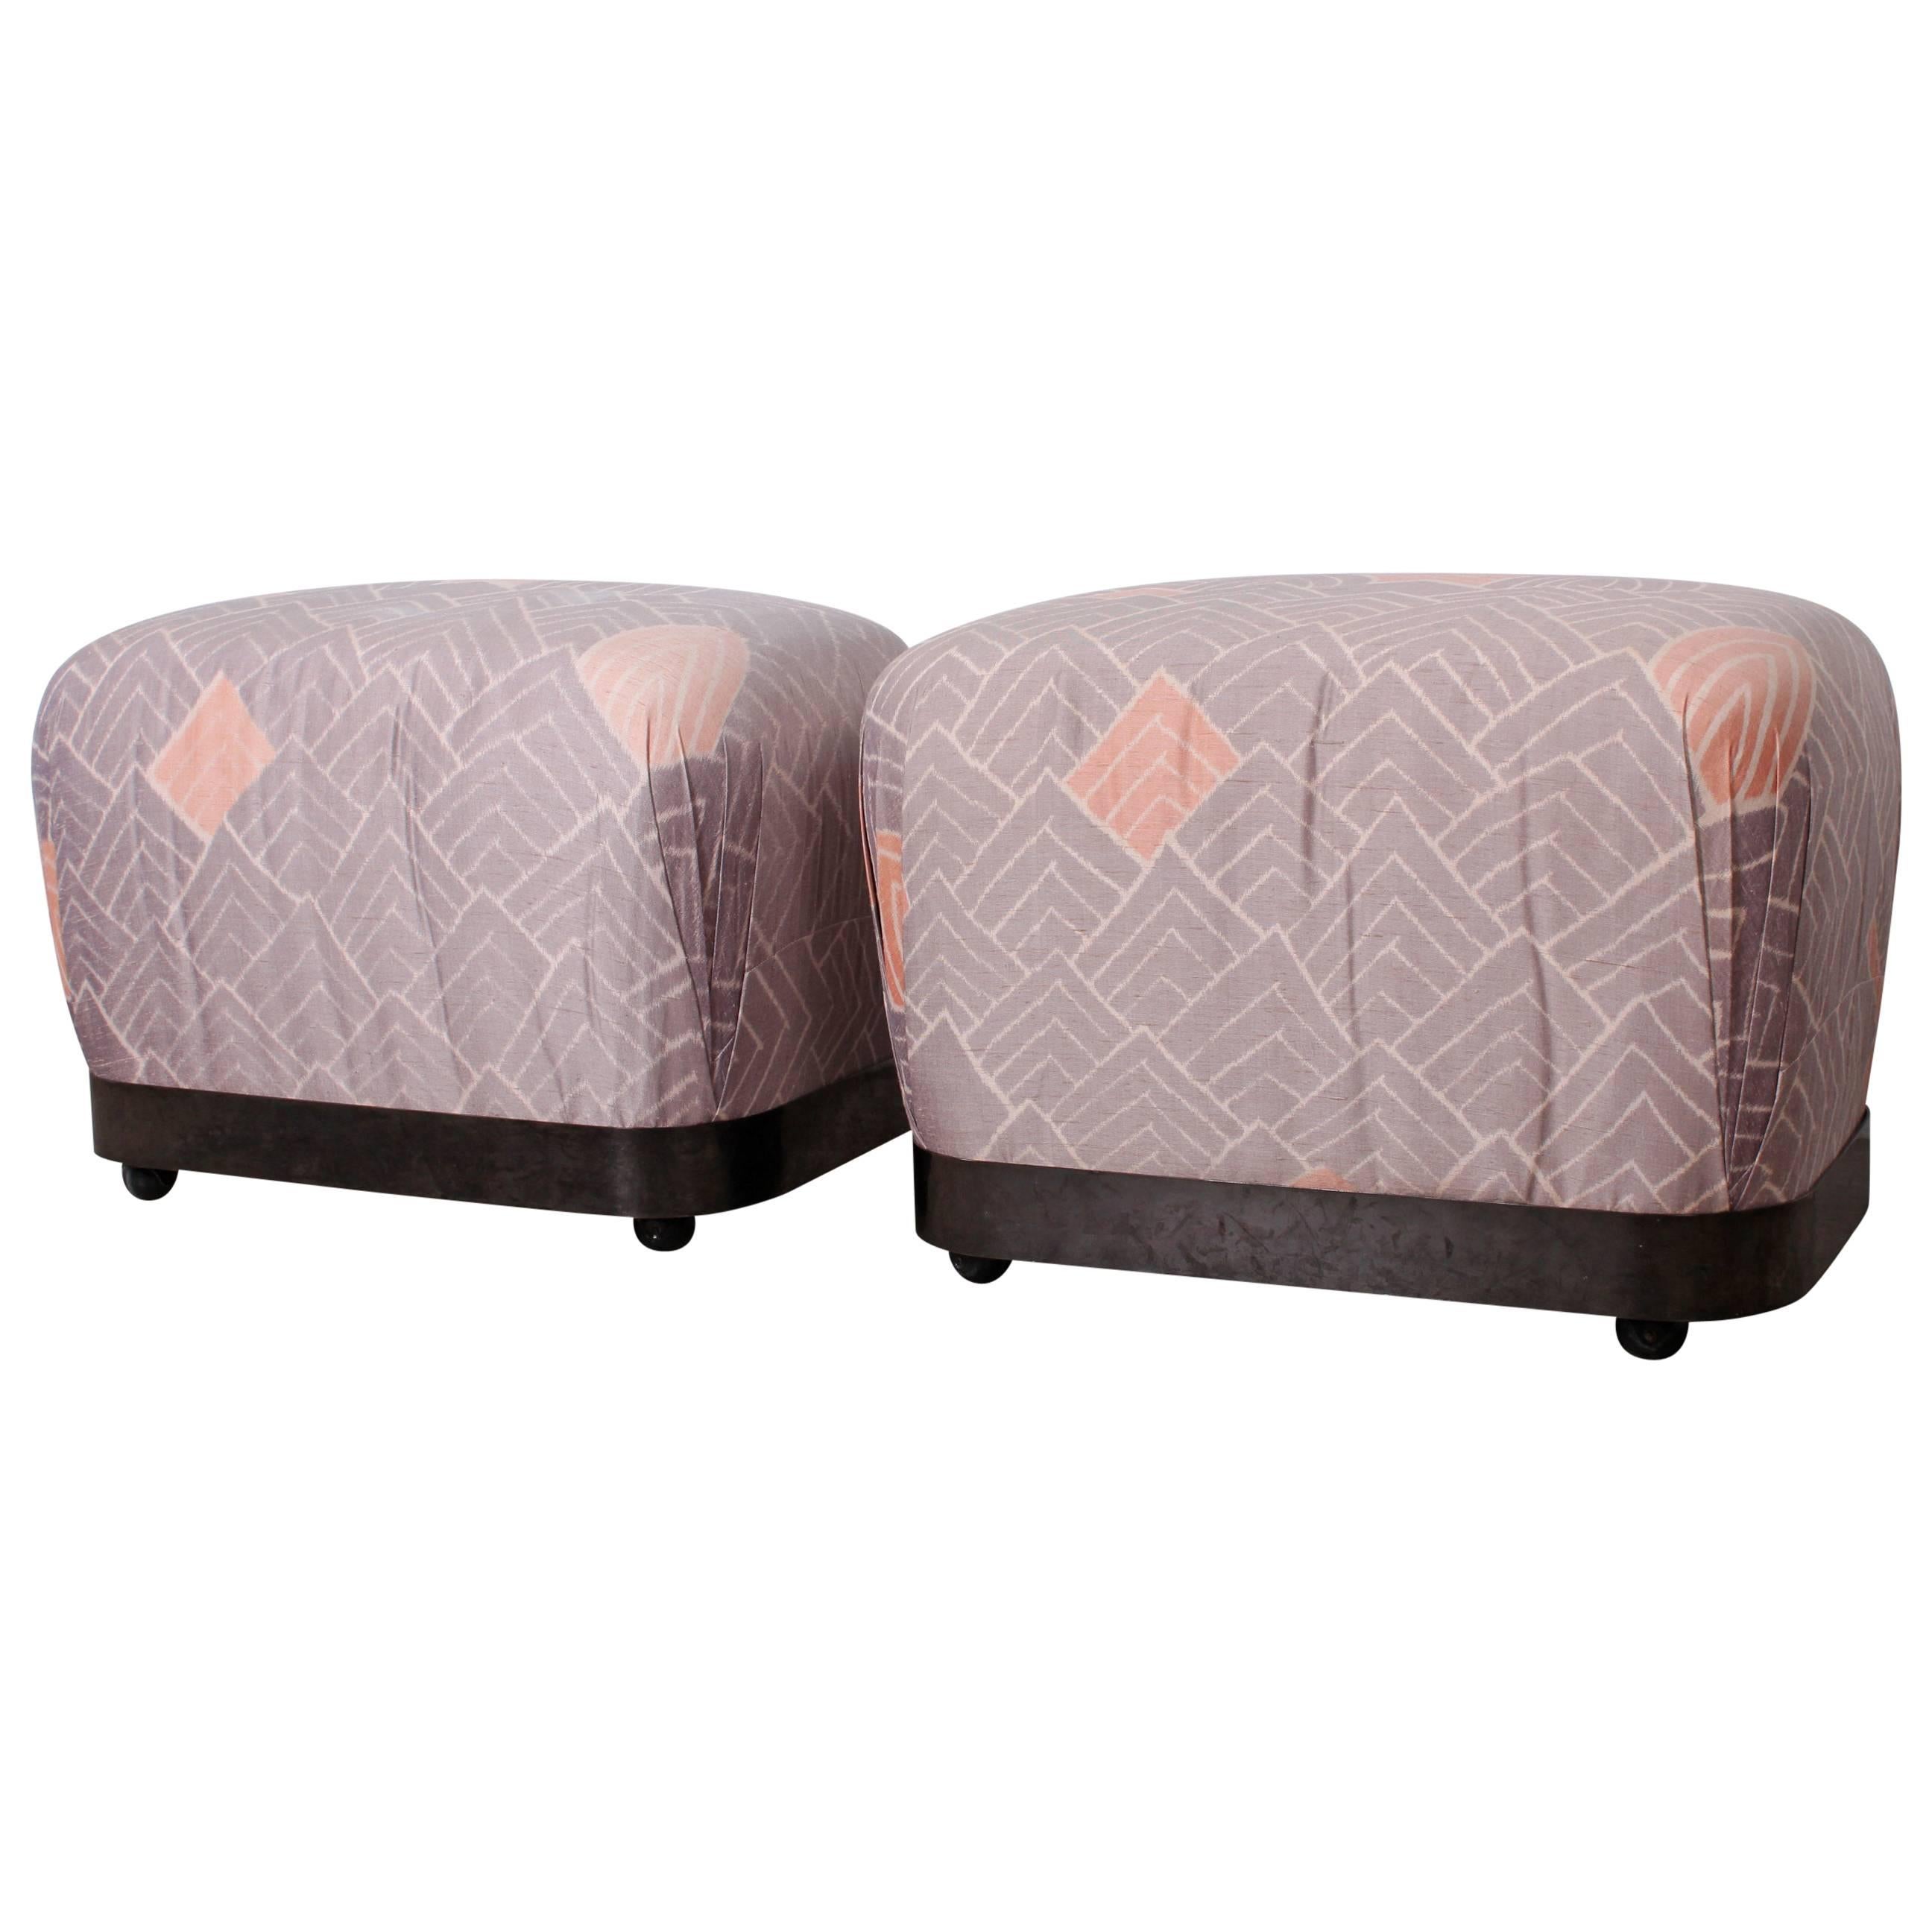 Pair of Ottomans / Poufs by Karl Springer